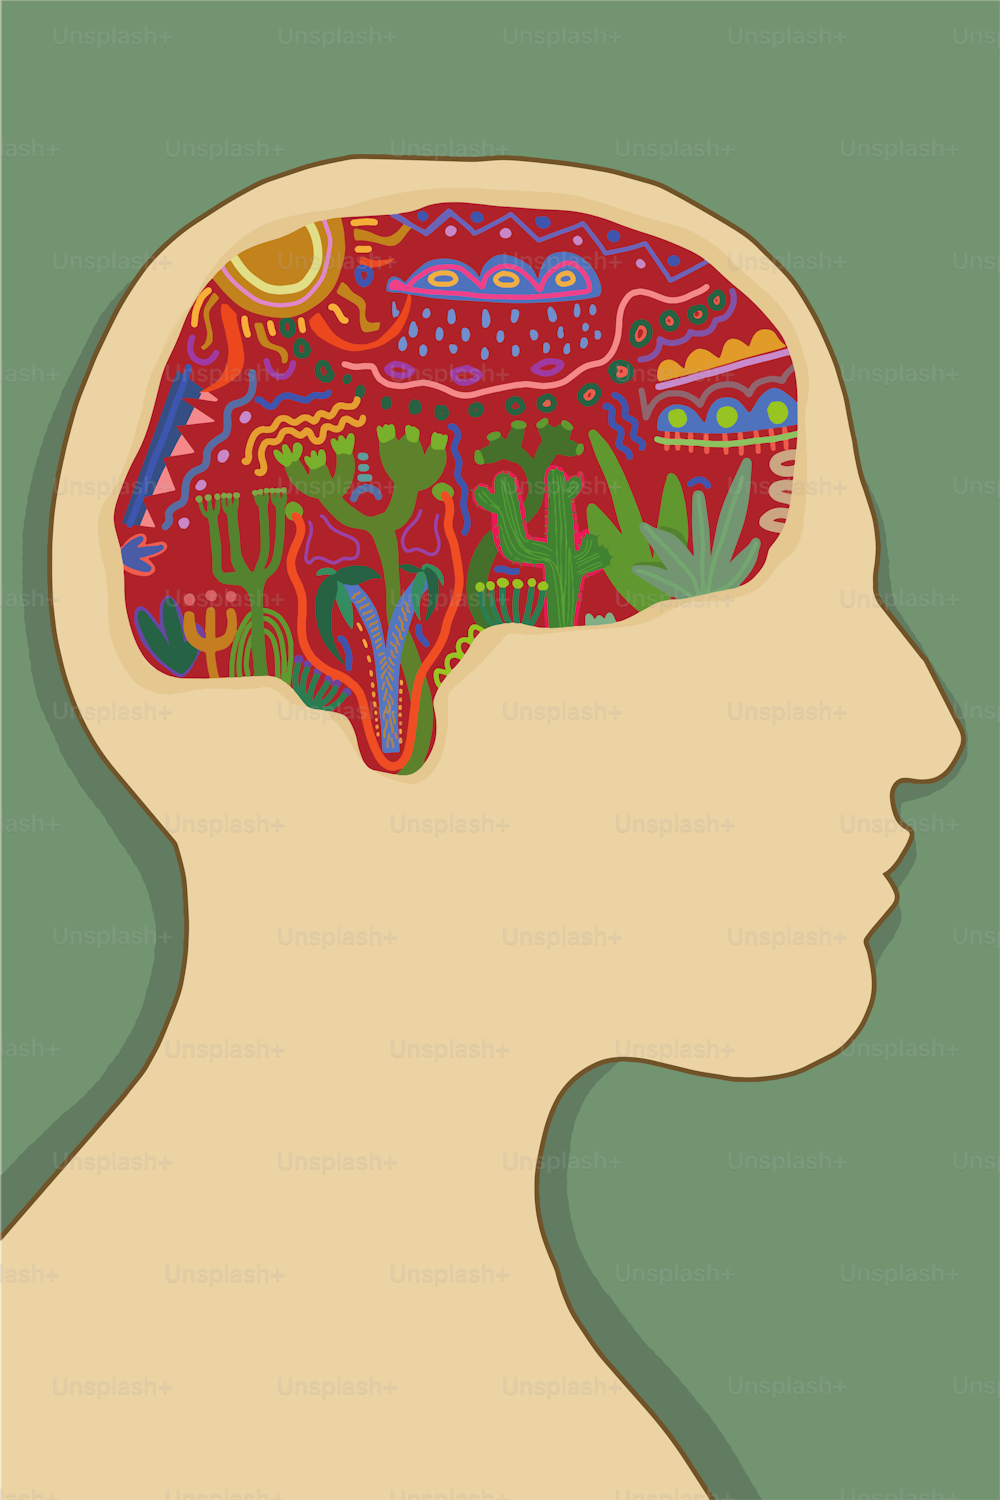 Illustration of a head with a colorful mind on green background that represents the ideas and thinking of a person struggling with Mental problems